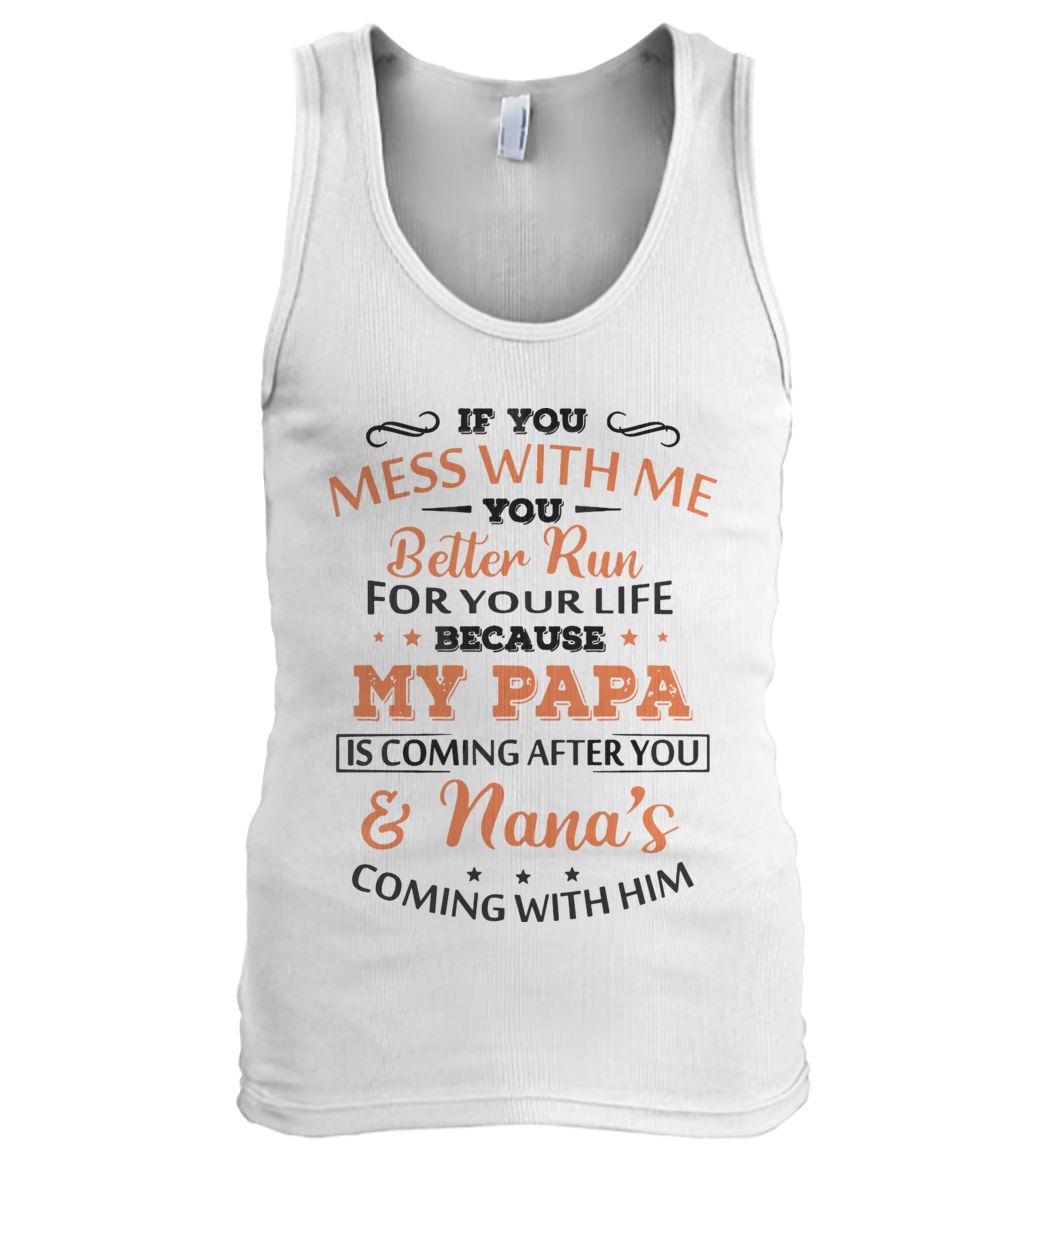 If you mess with me you better run for your life because my papa is coming after you and nana’s coming with him tank top